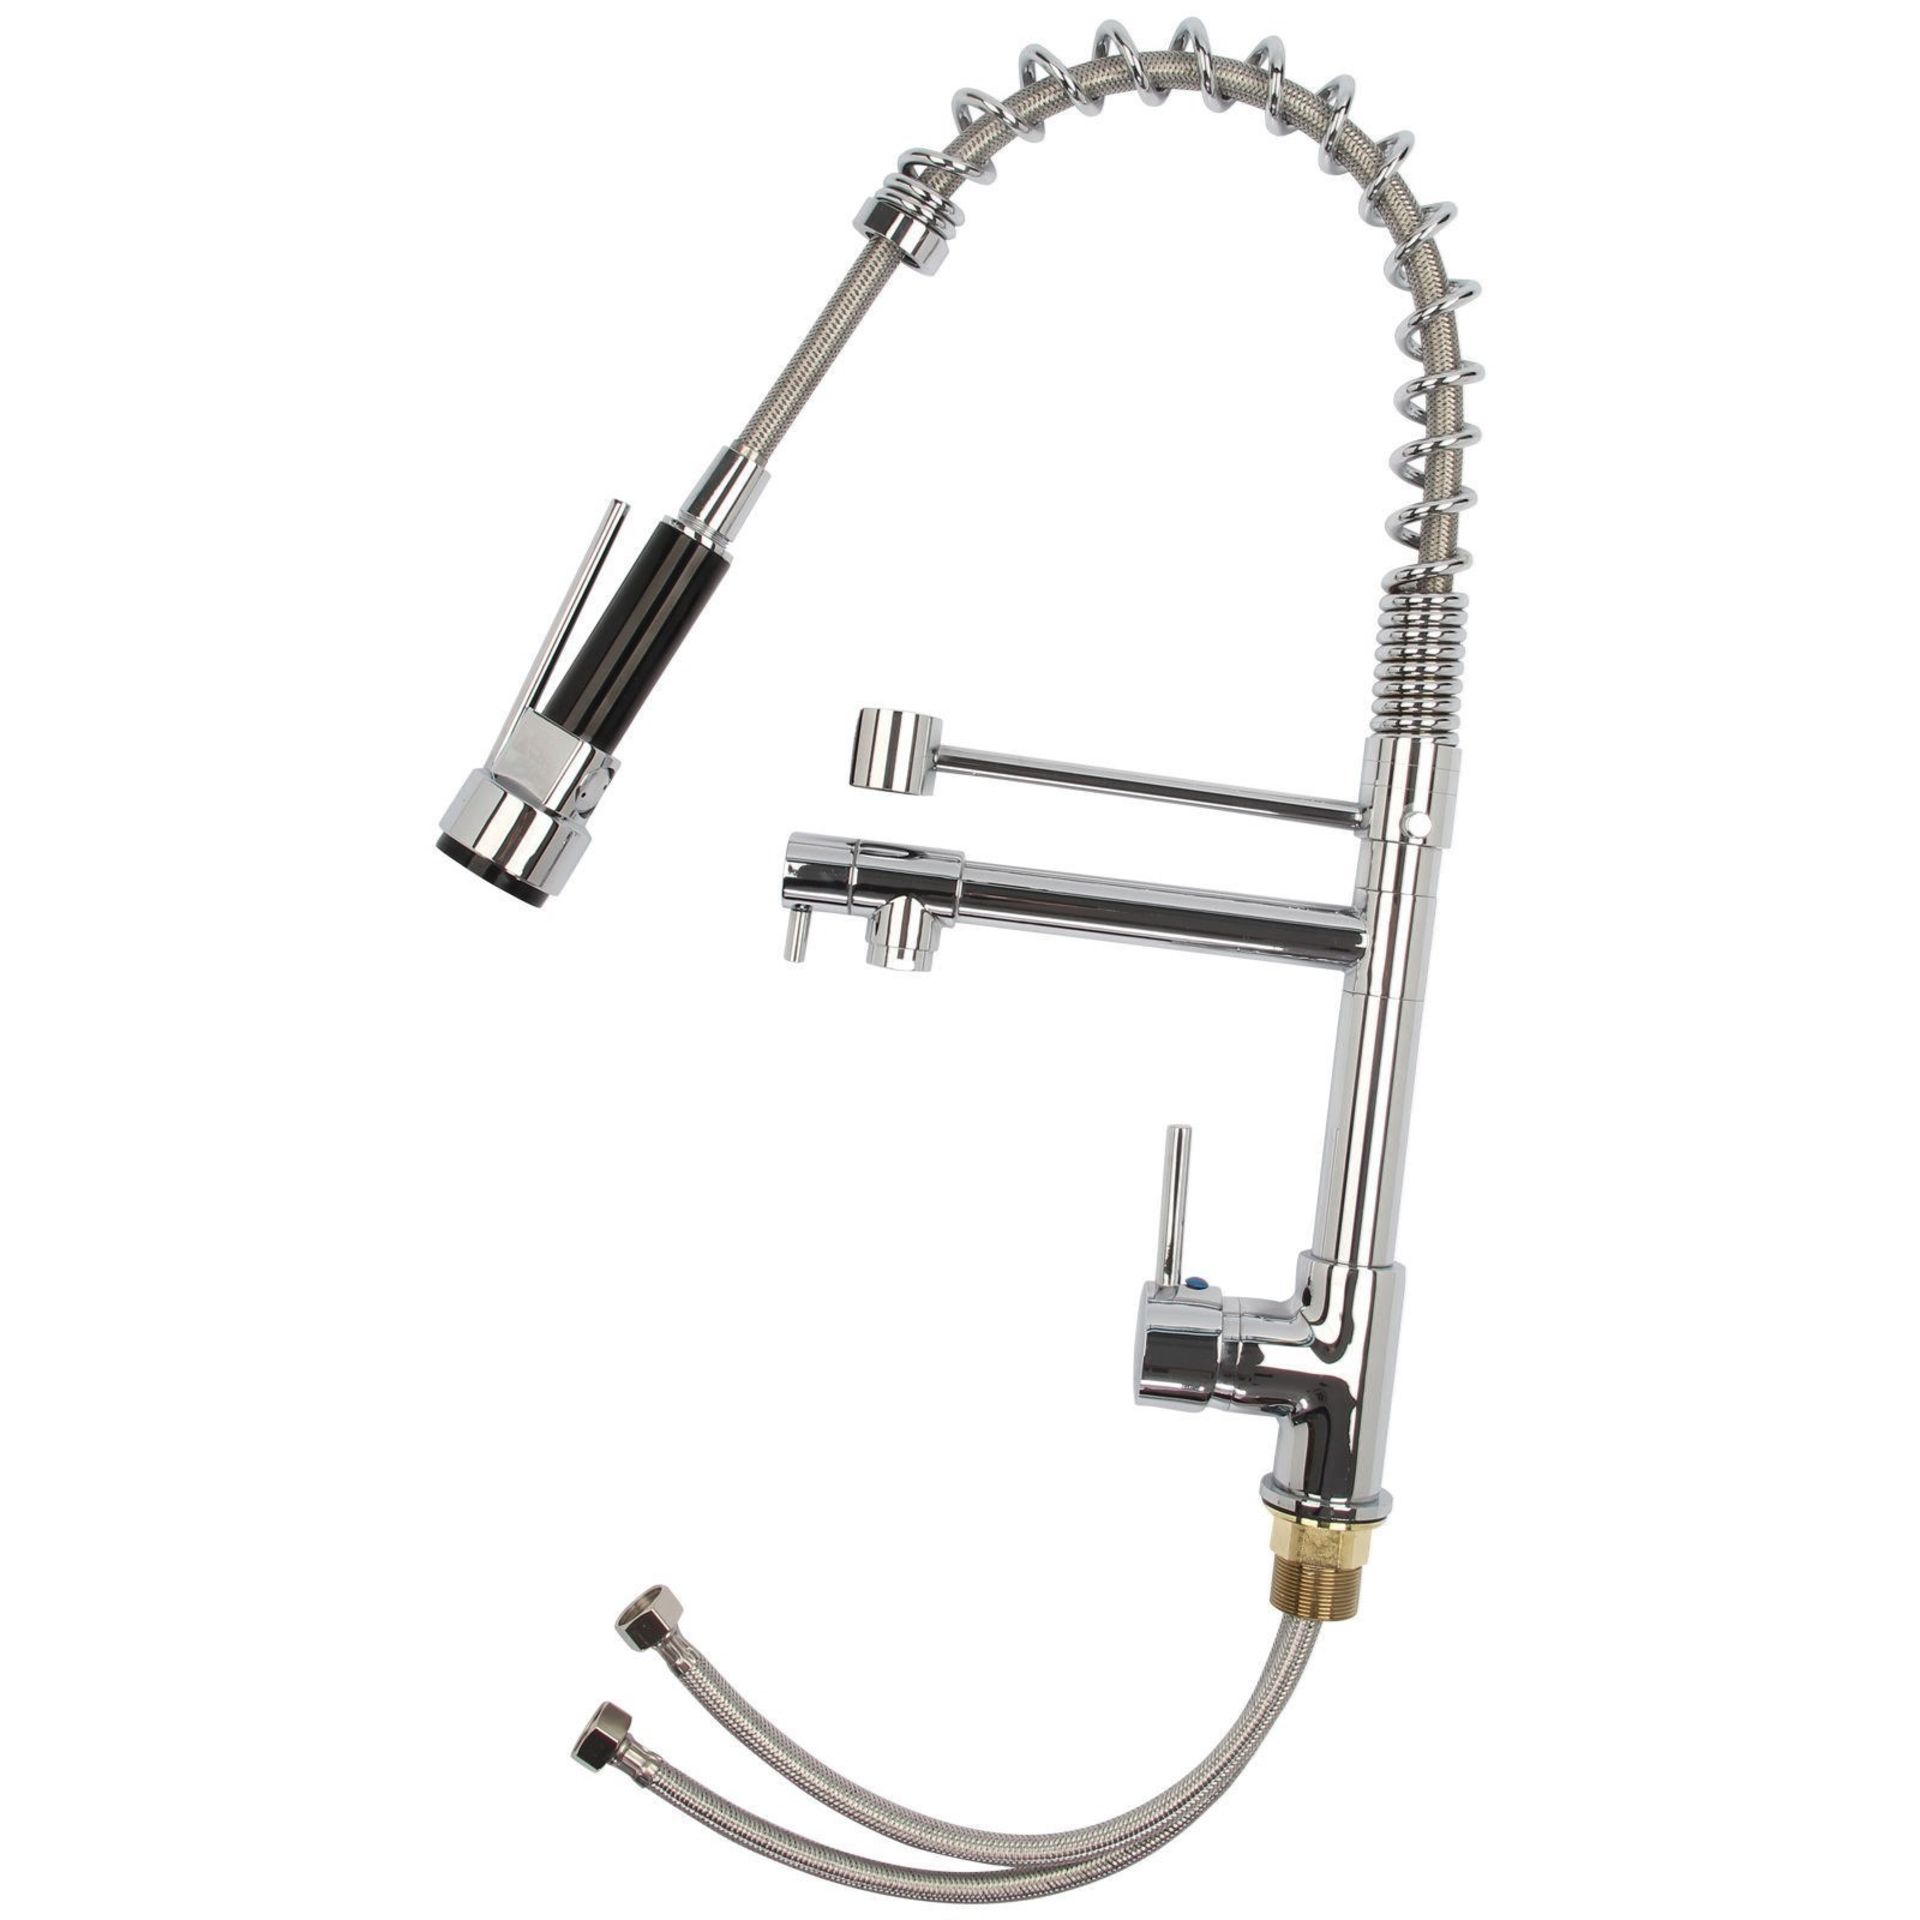 (YU1031) Bentley Modern Monobloc Chrome Brass Pull Out Spray Mixer Tap. RRP £349.99.This tap ... - Image 2 of 2